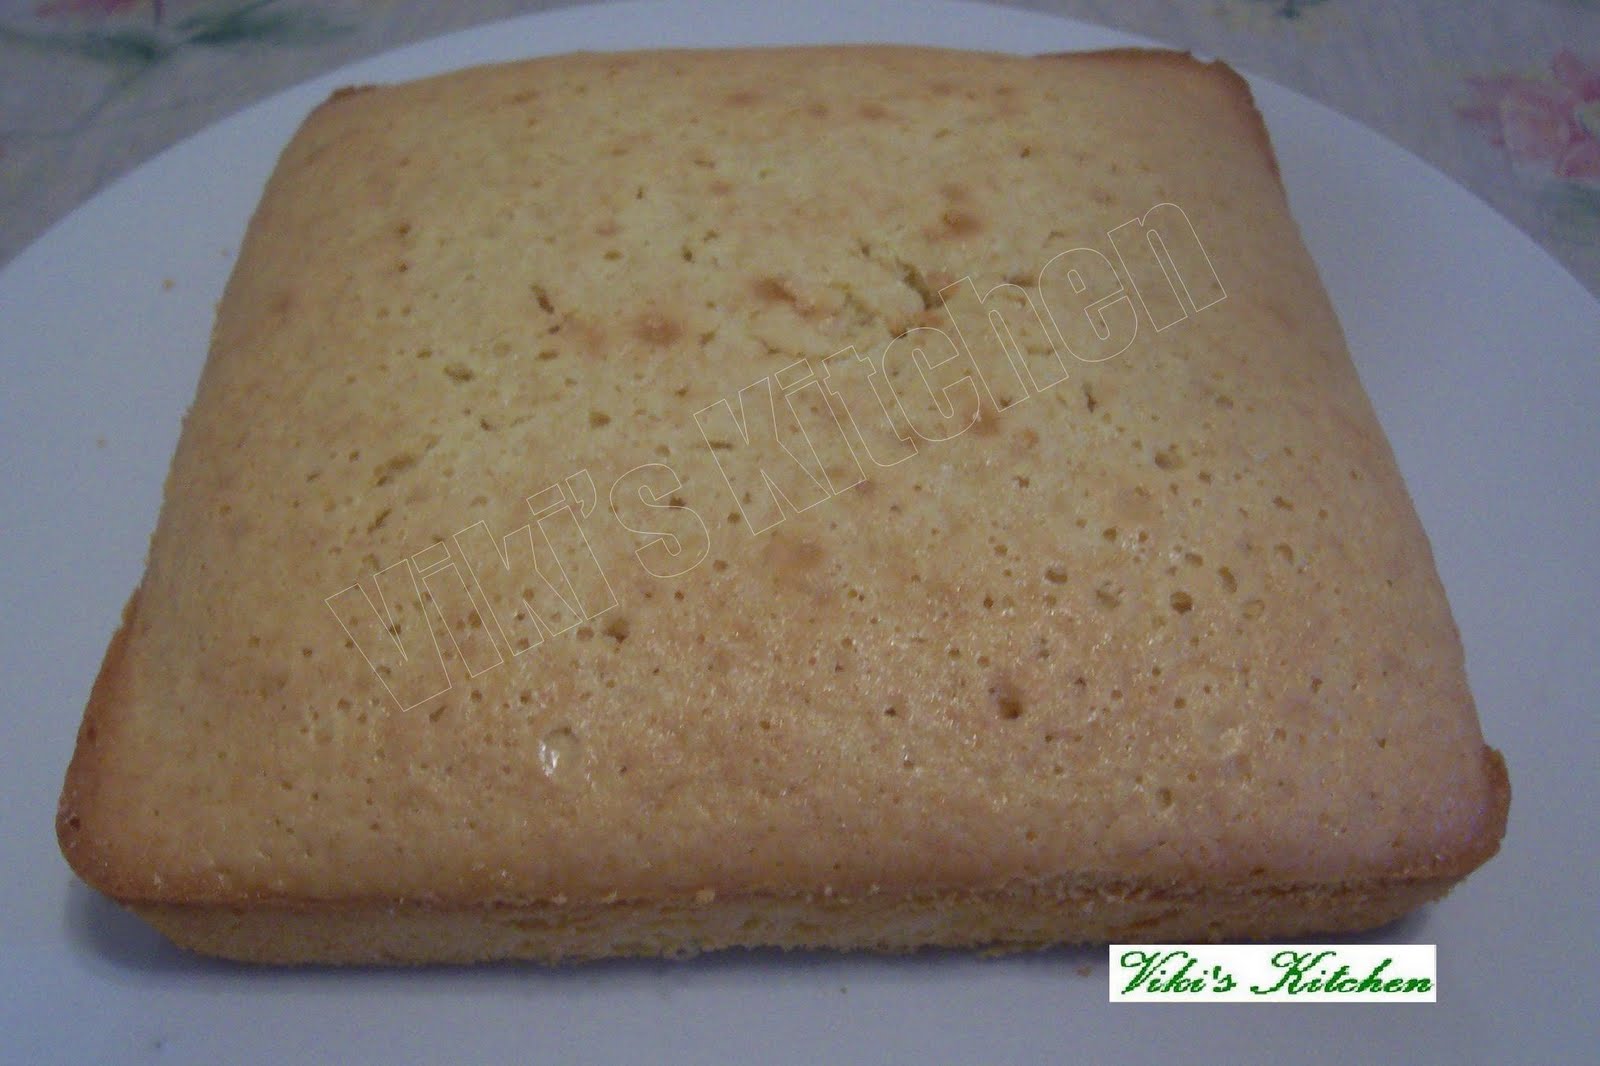 Plain vanilla cake baked and allowed to cool before slicing.